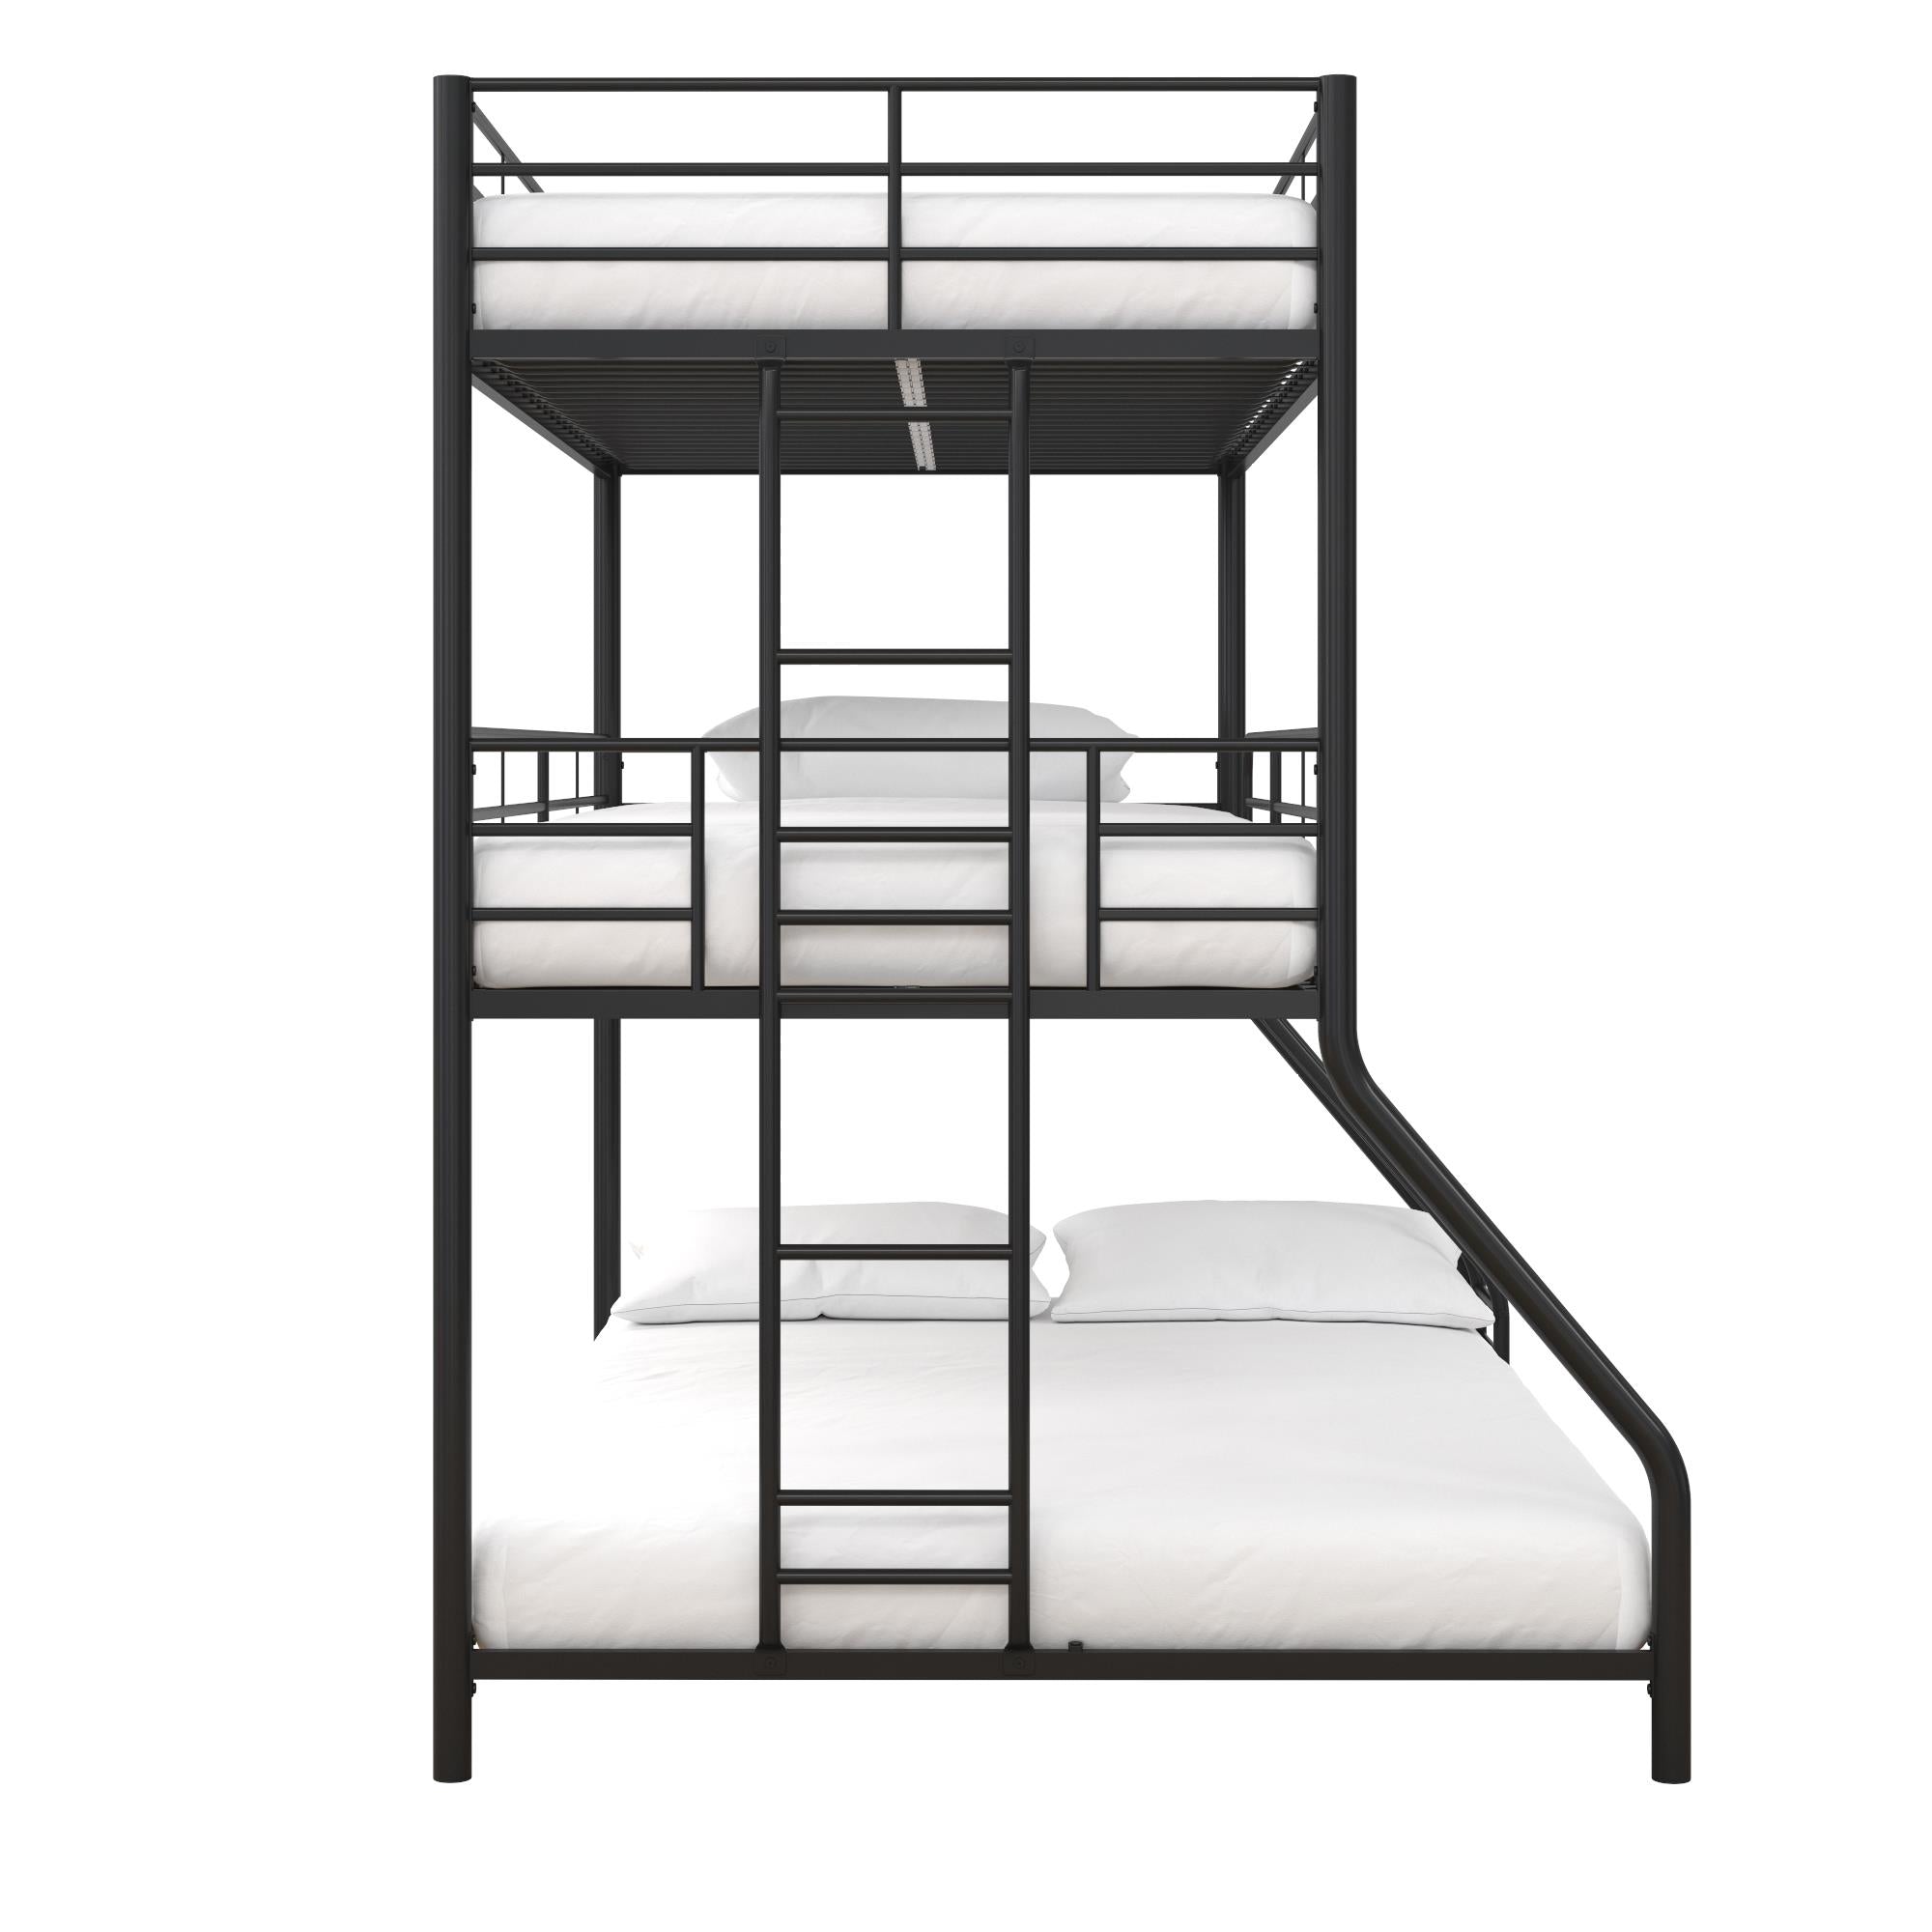 DHP Everleigh Triple Metal Bunk Bed, Twin/Twin/Full, Bed for Kids, Black